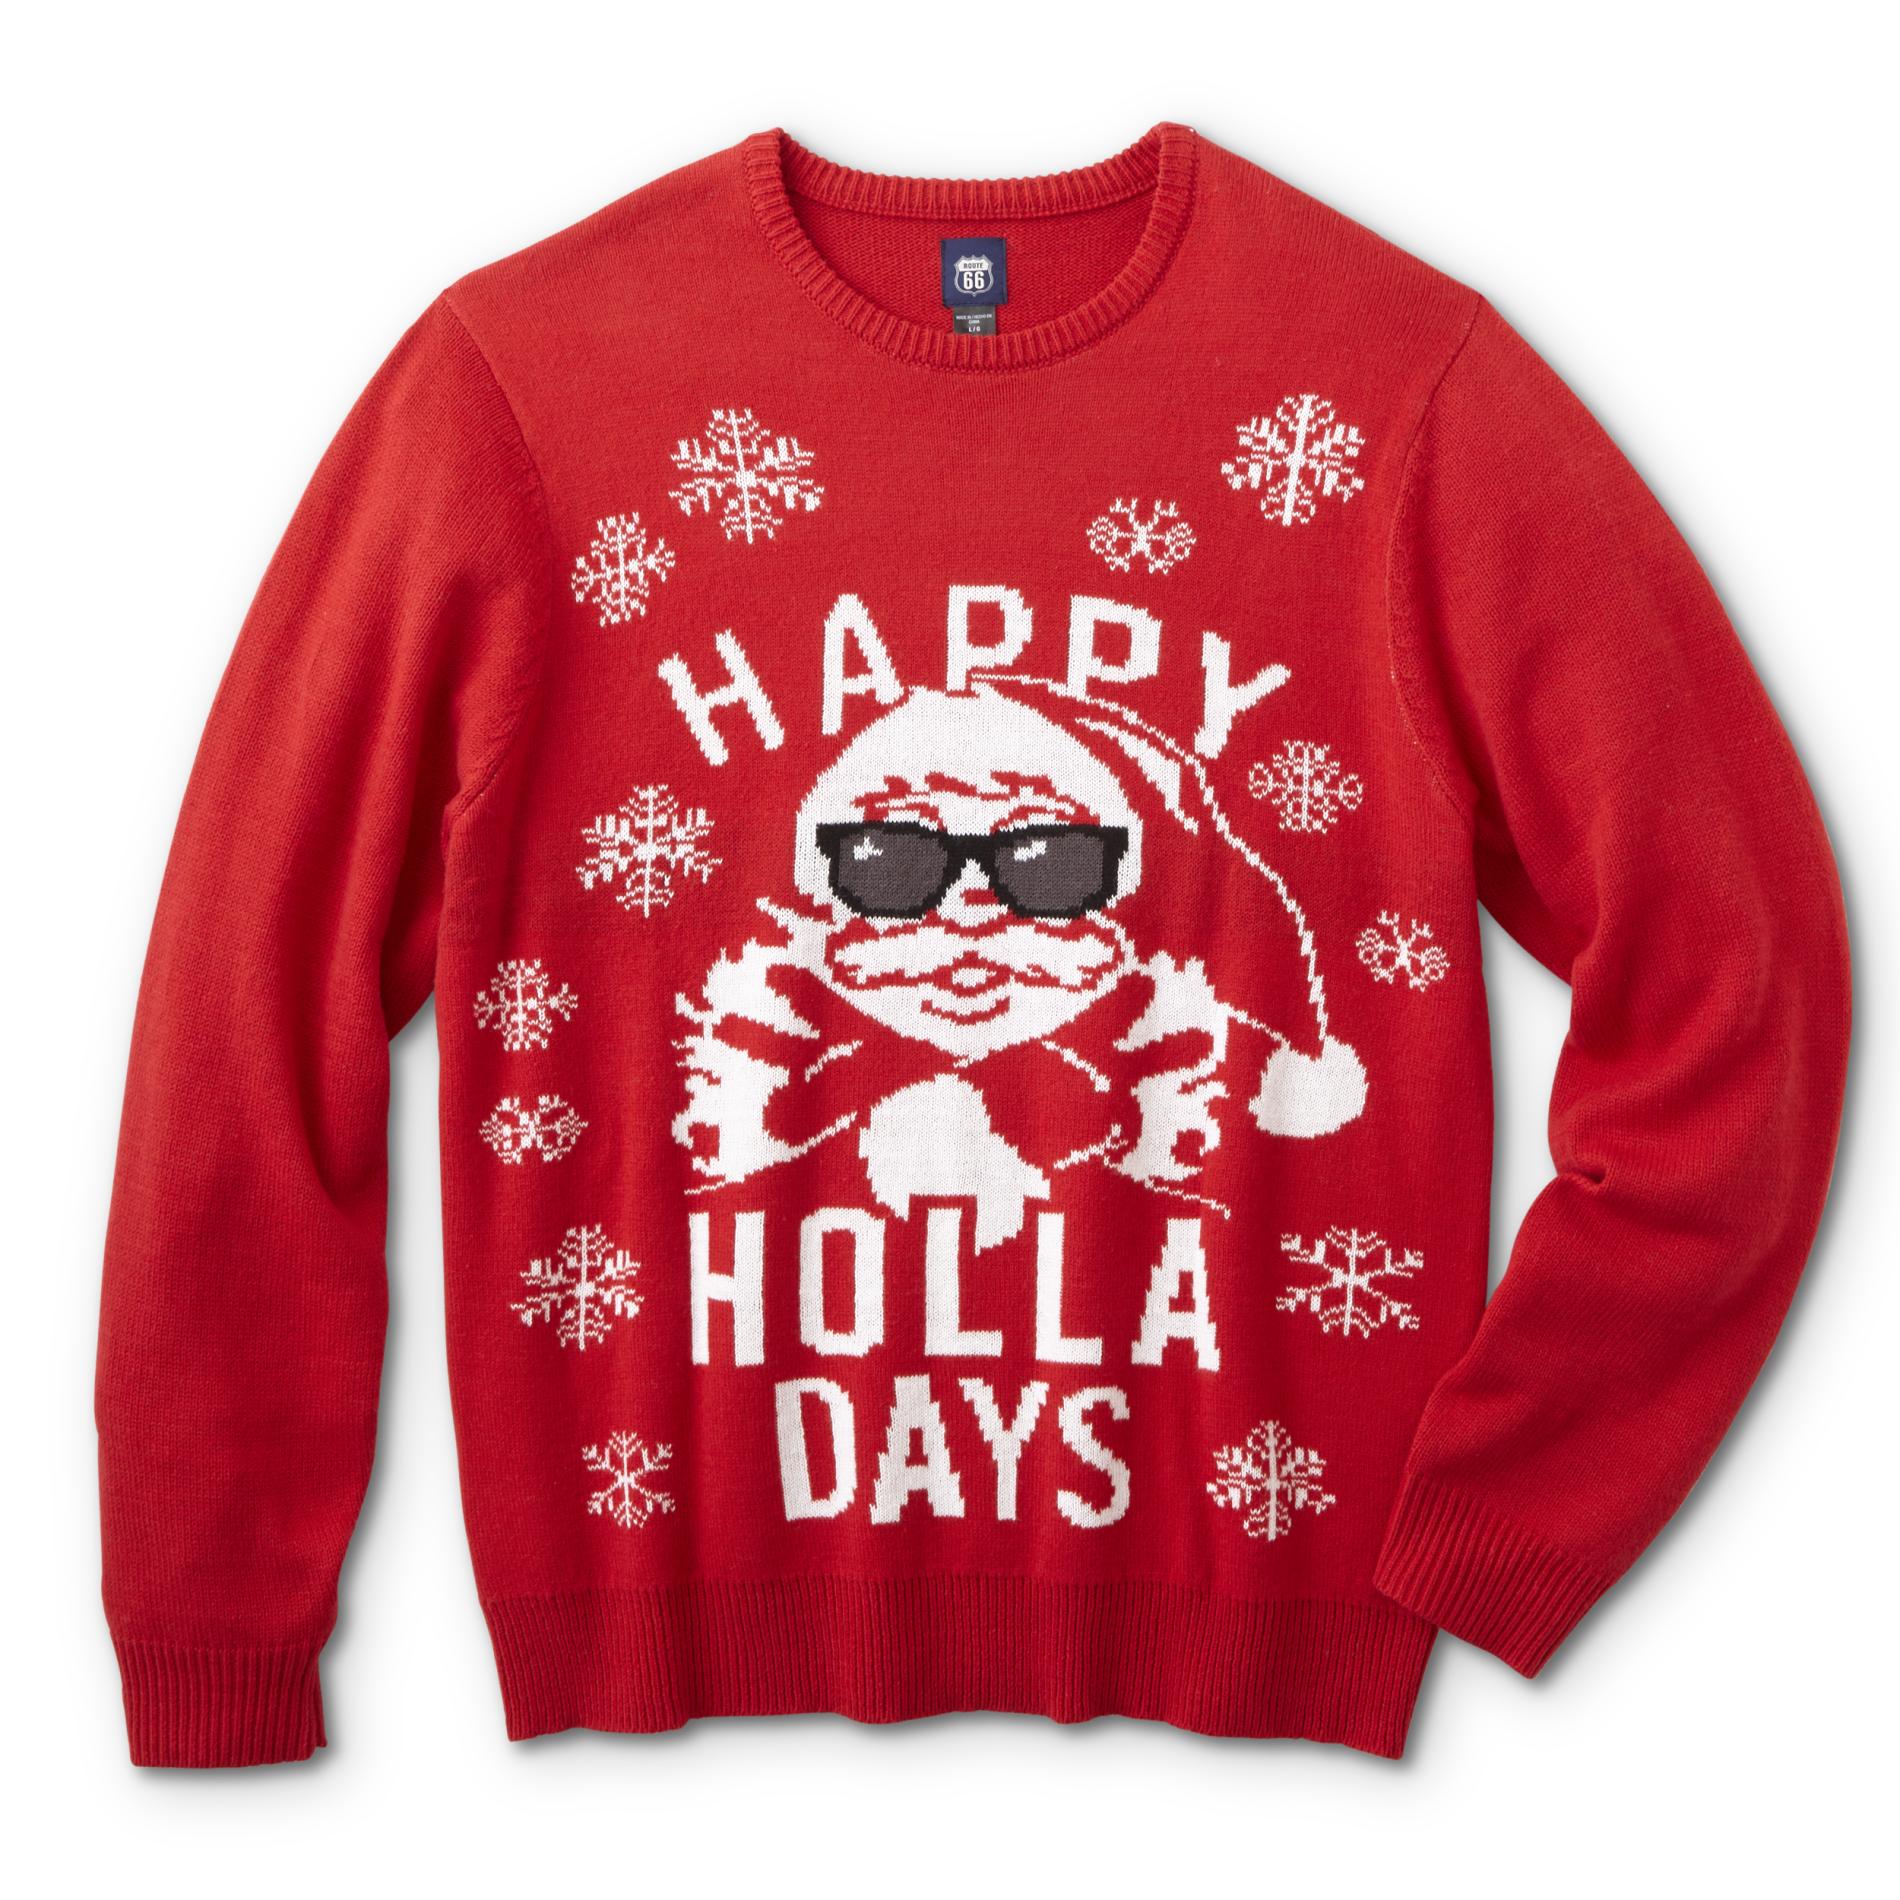 Route 66 Young Men's Christmas Sweater - Happy Holla Days